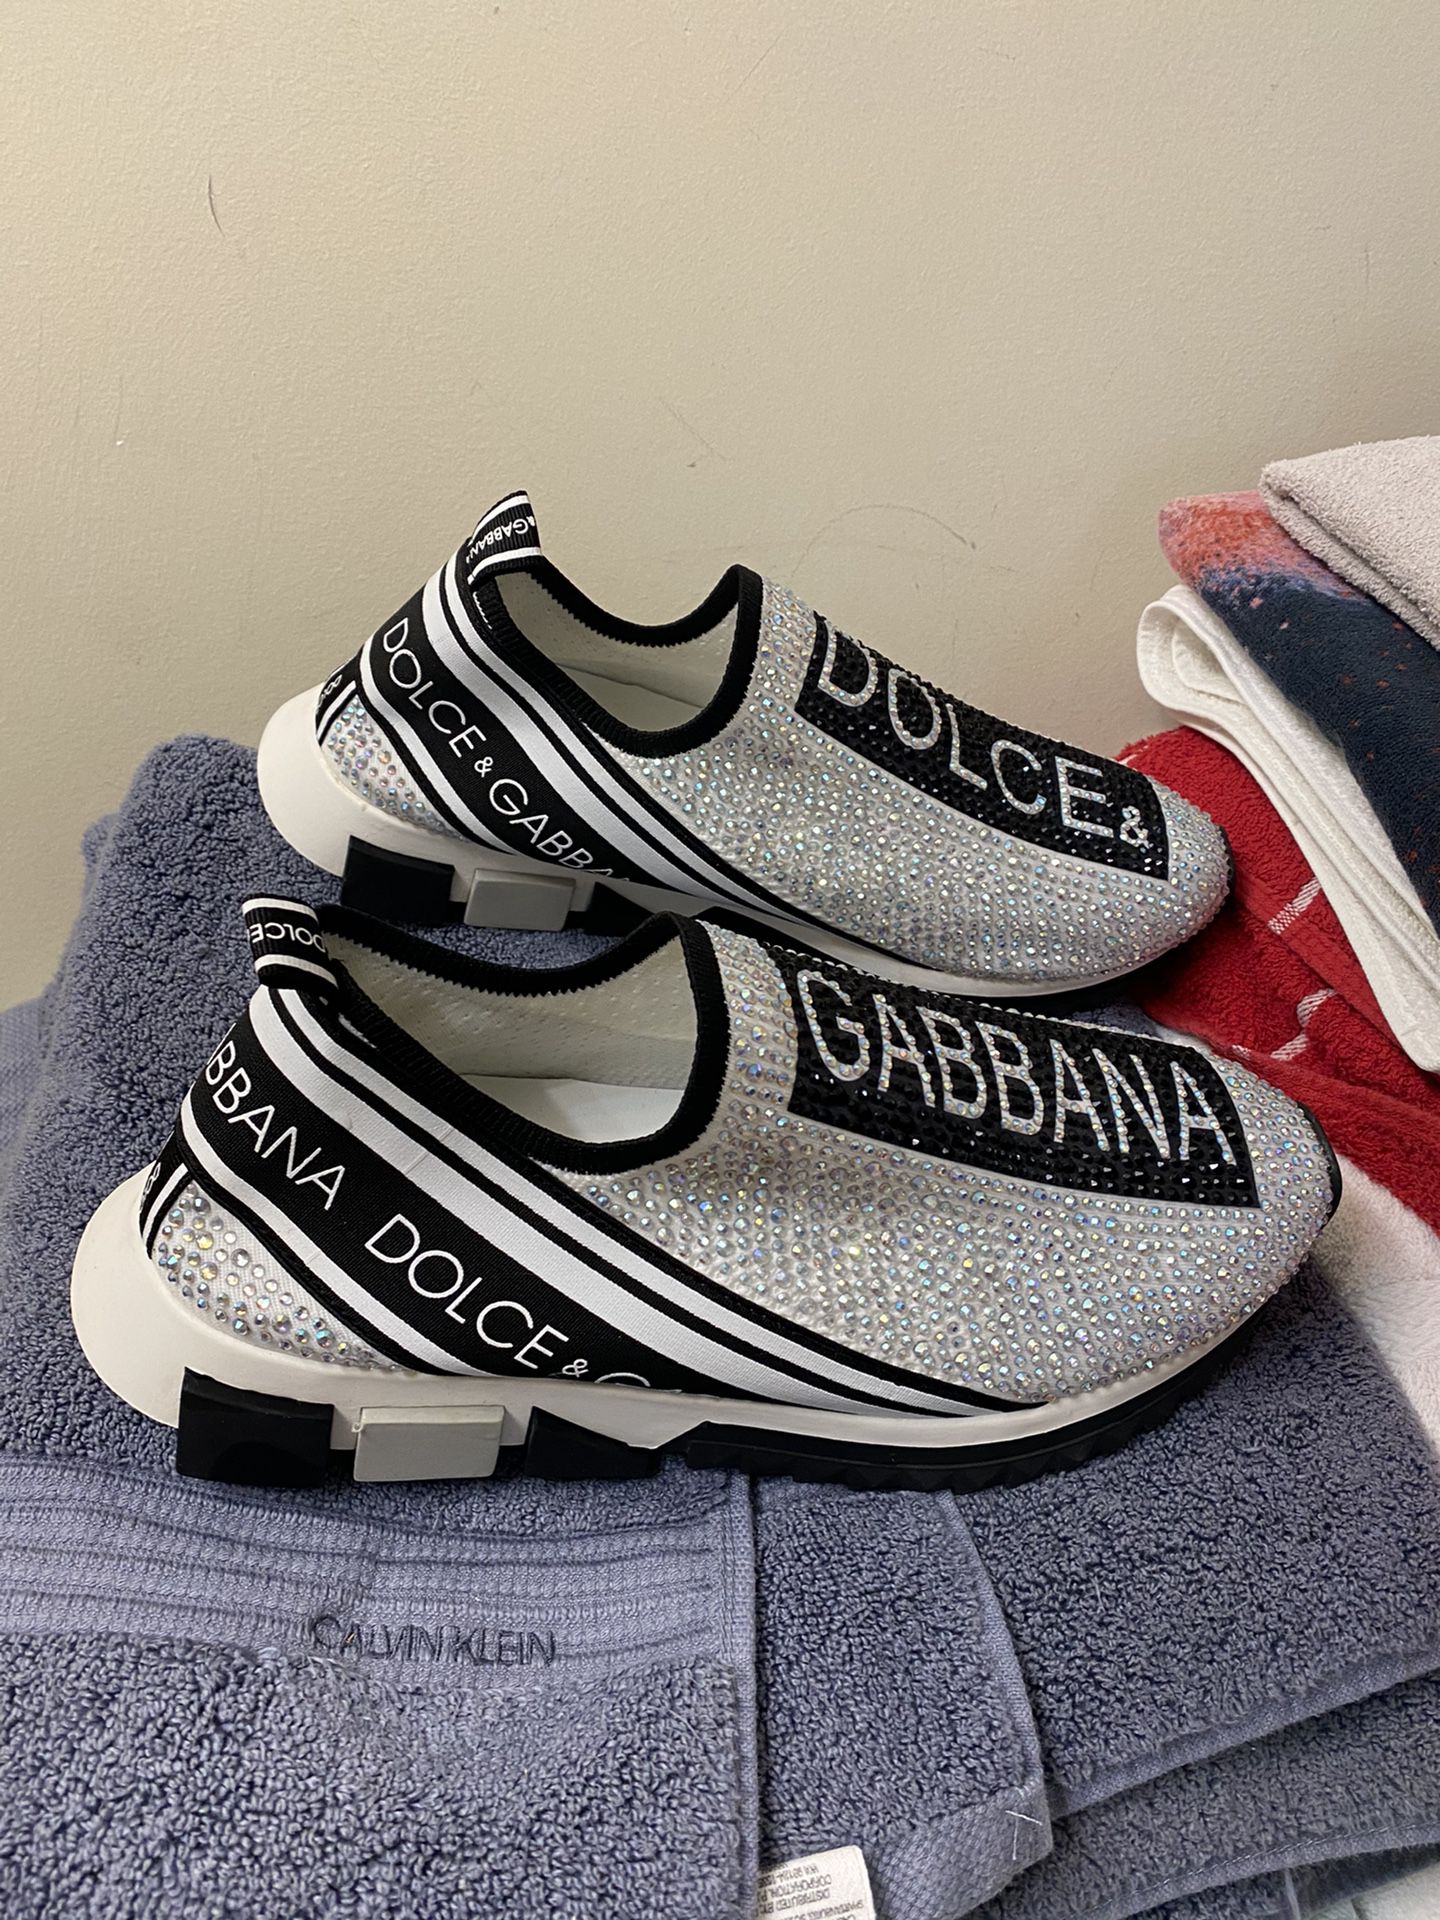 dolce and gabbana shoes white, rhinestones, 38 men for Sale in Hiram ...